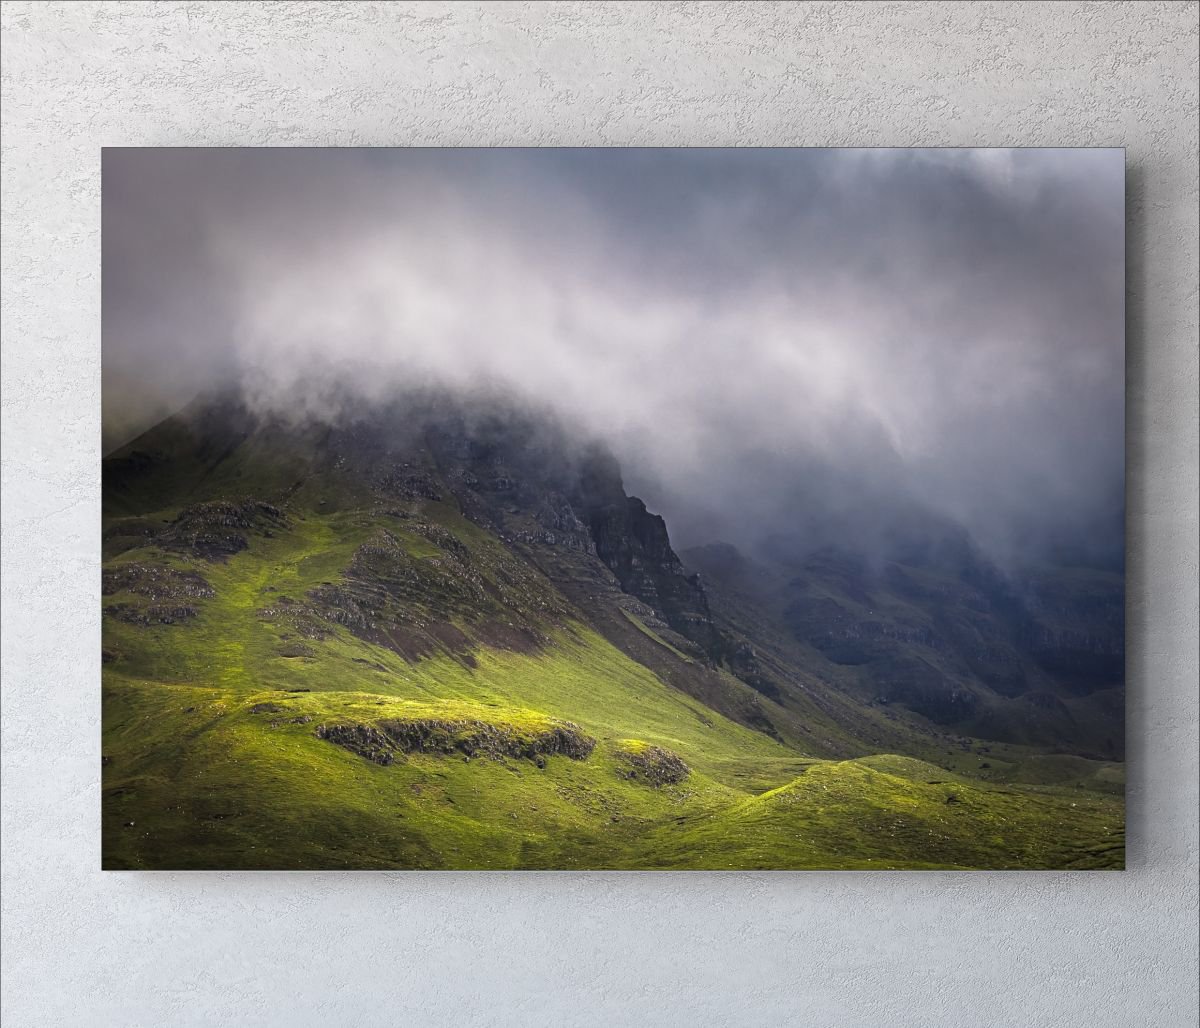 Hill of the Red Fox - Trotternish Ridge - Isle of Skye 60 x 40 inches Canvas by Lynne Douglas